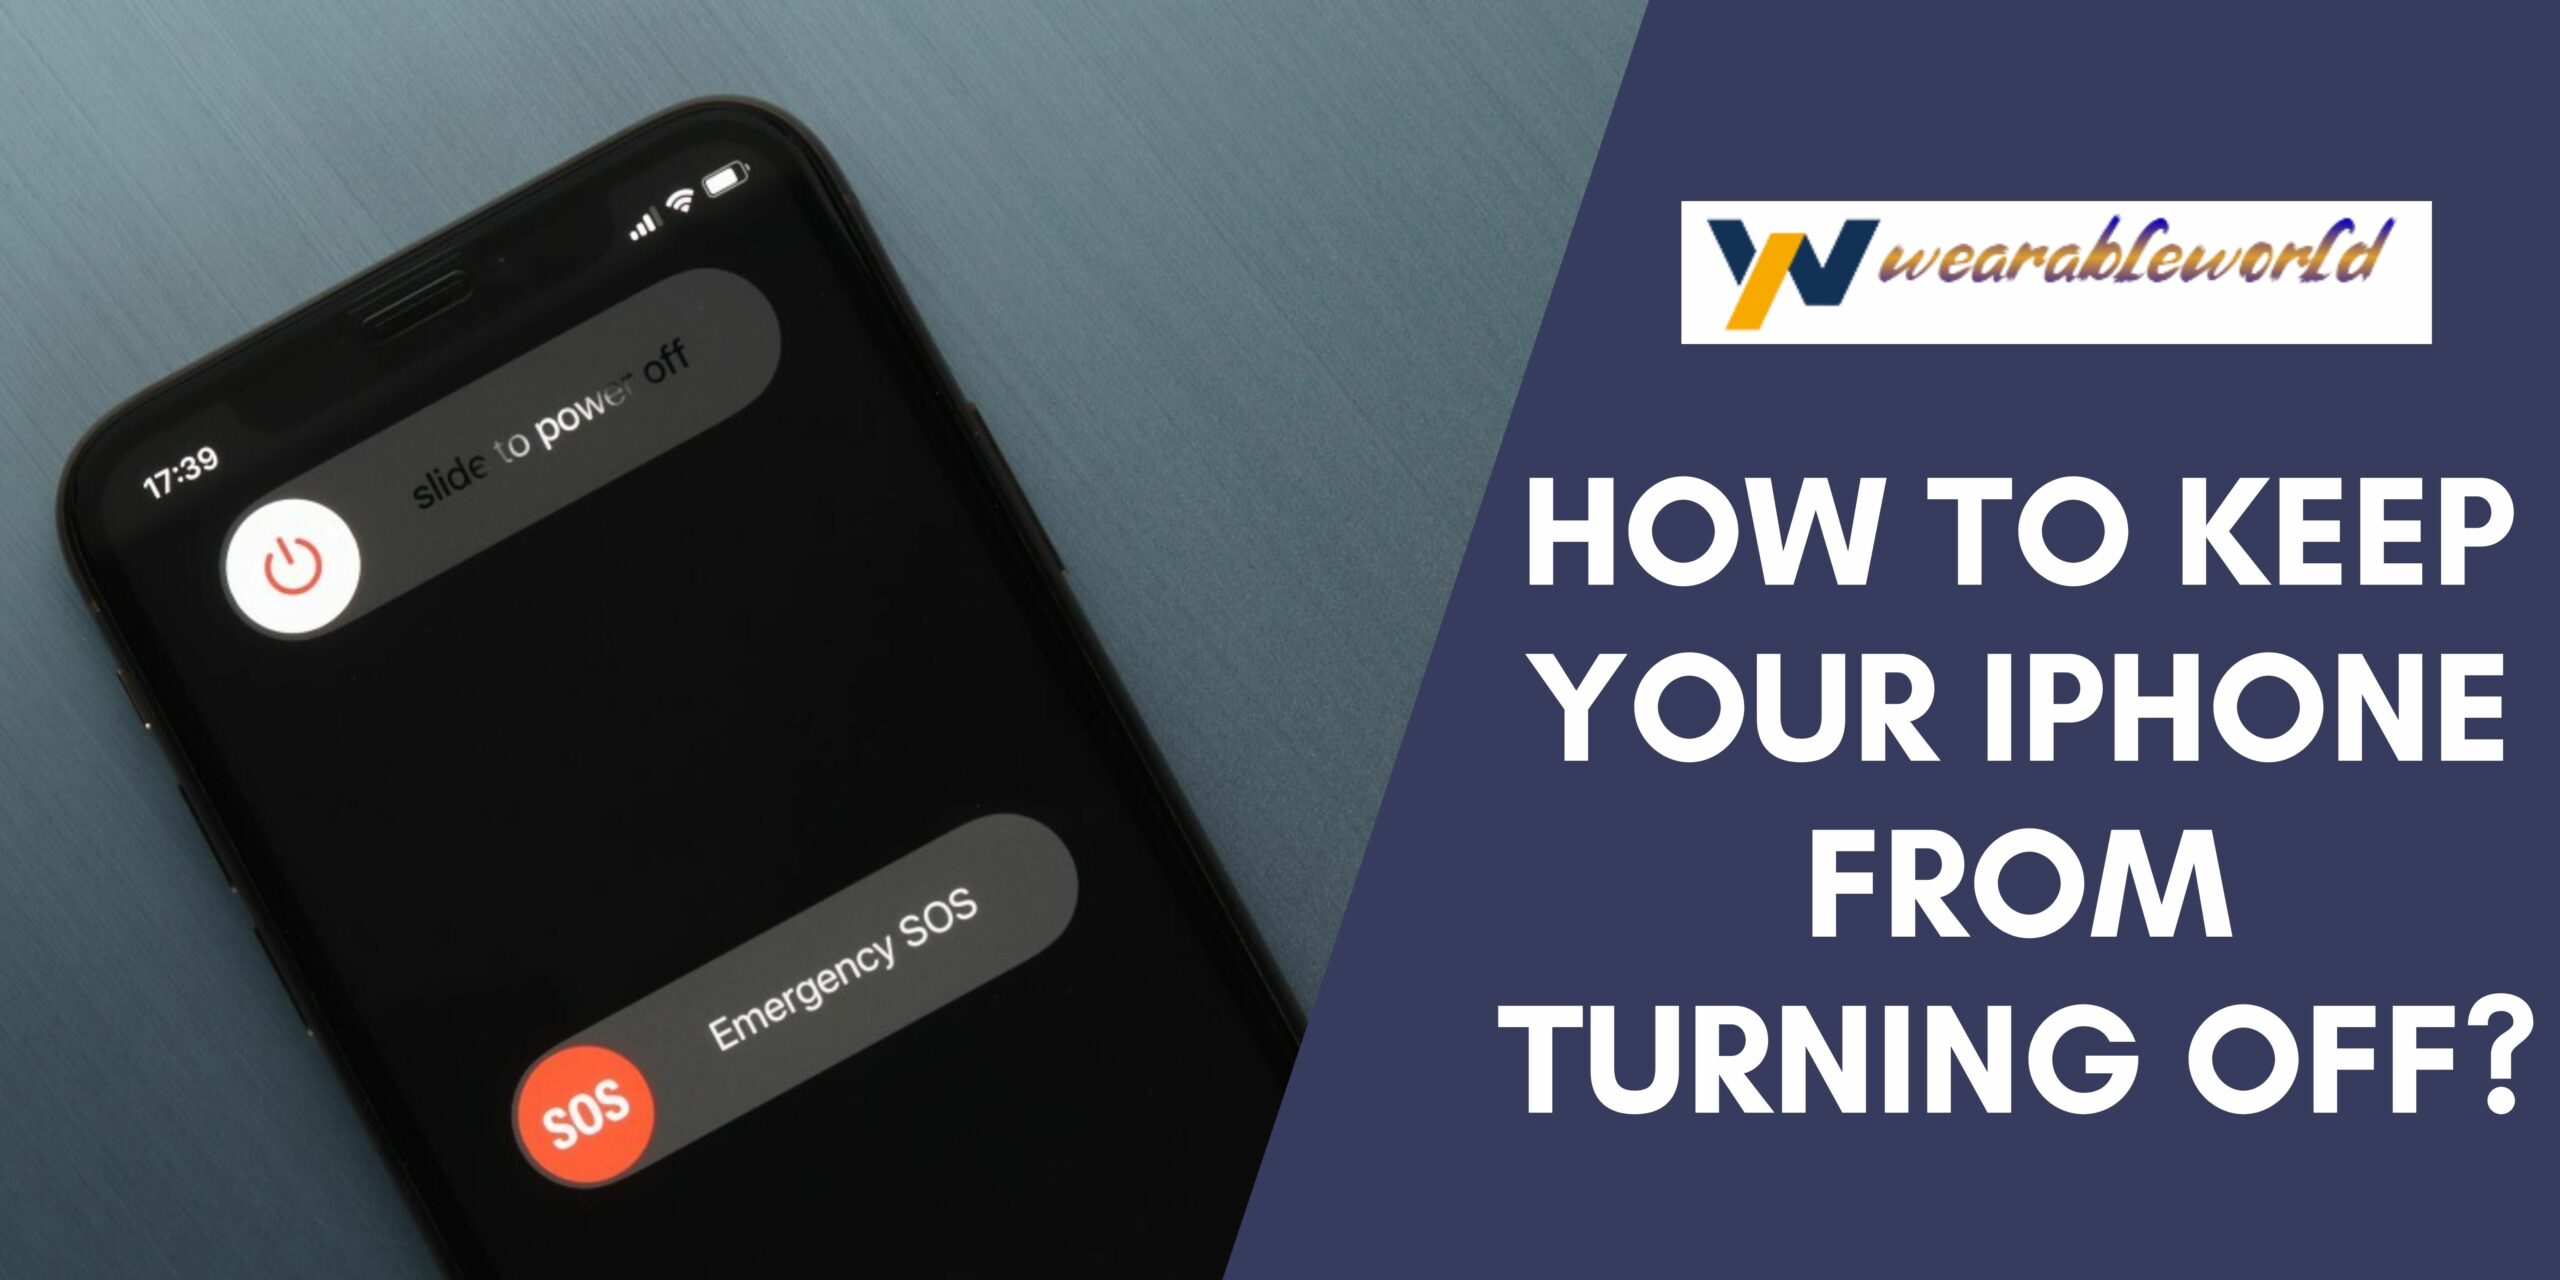 How to keep your iPhone from turning off